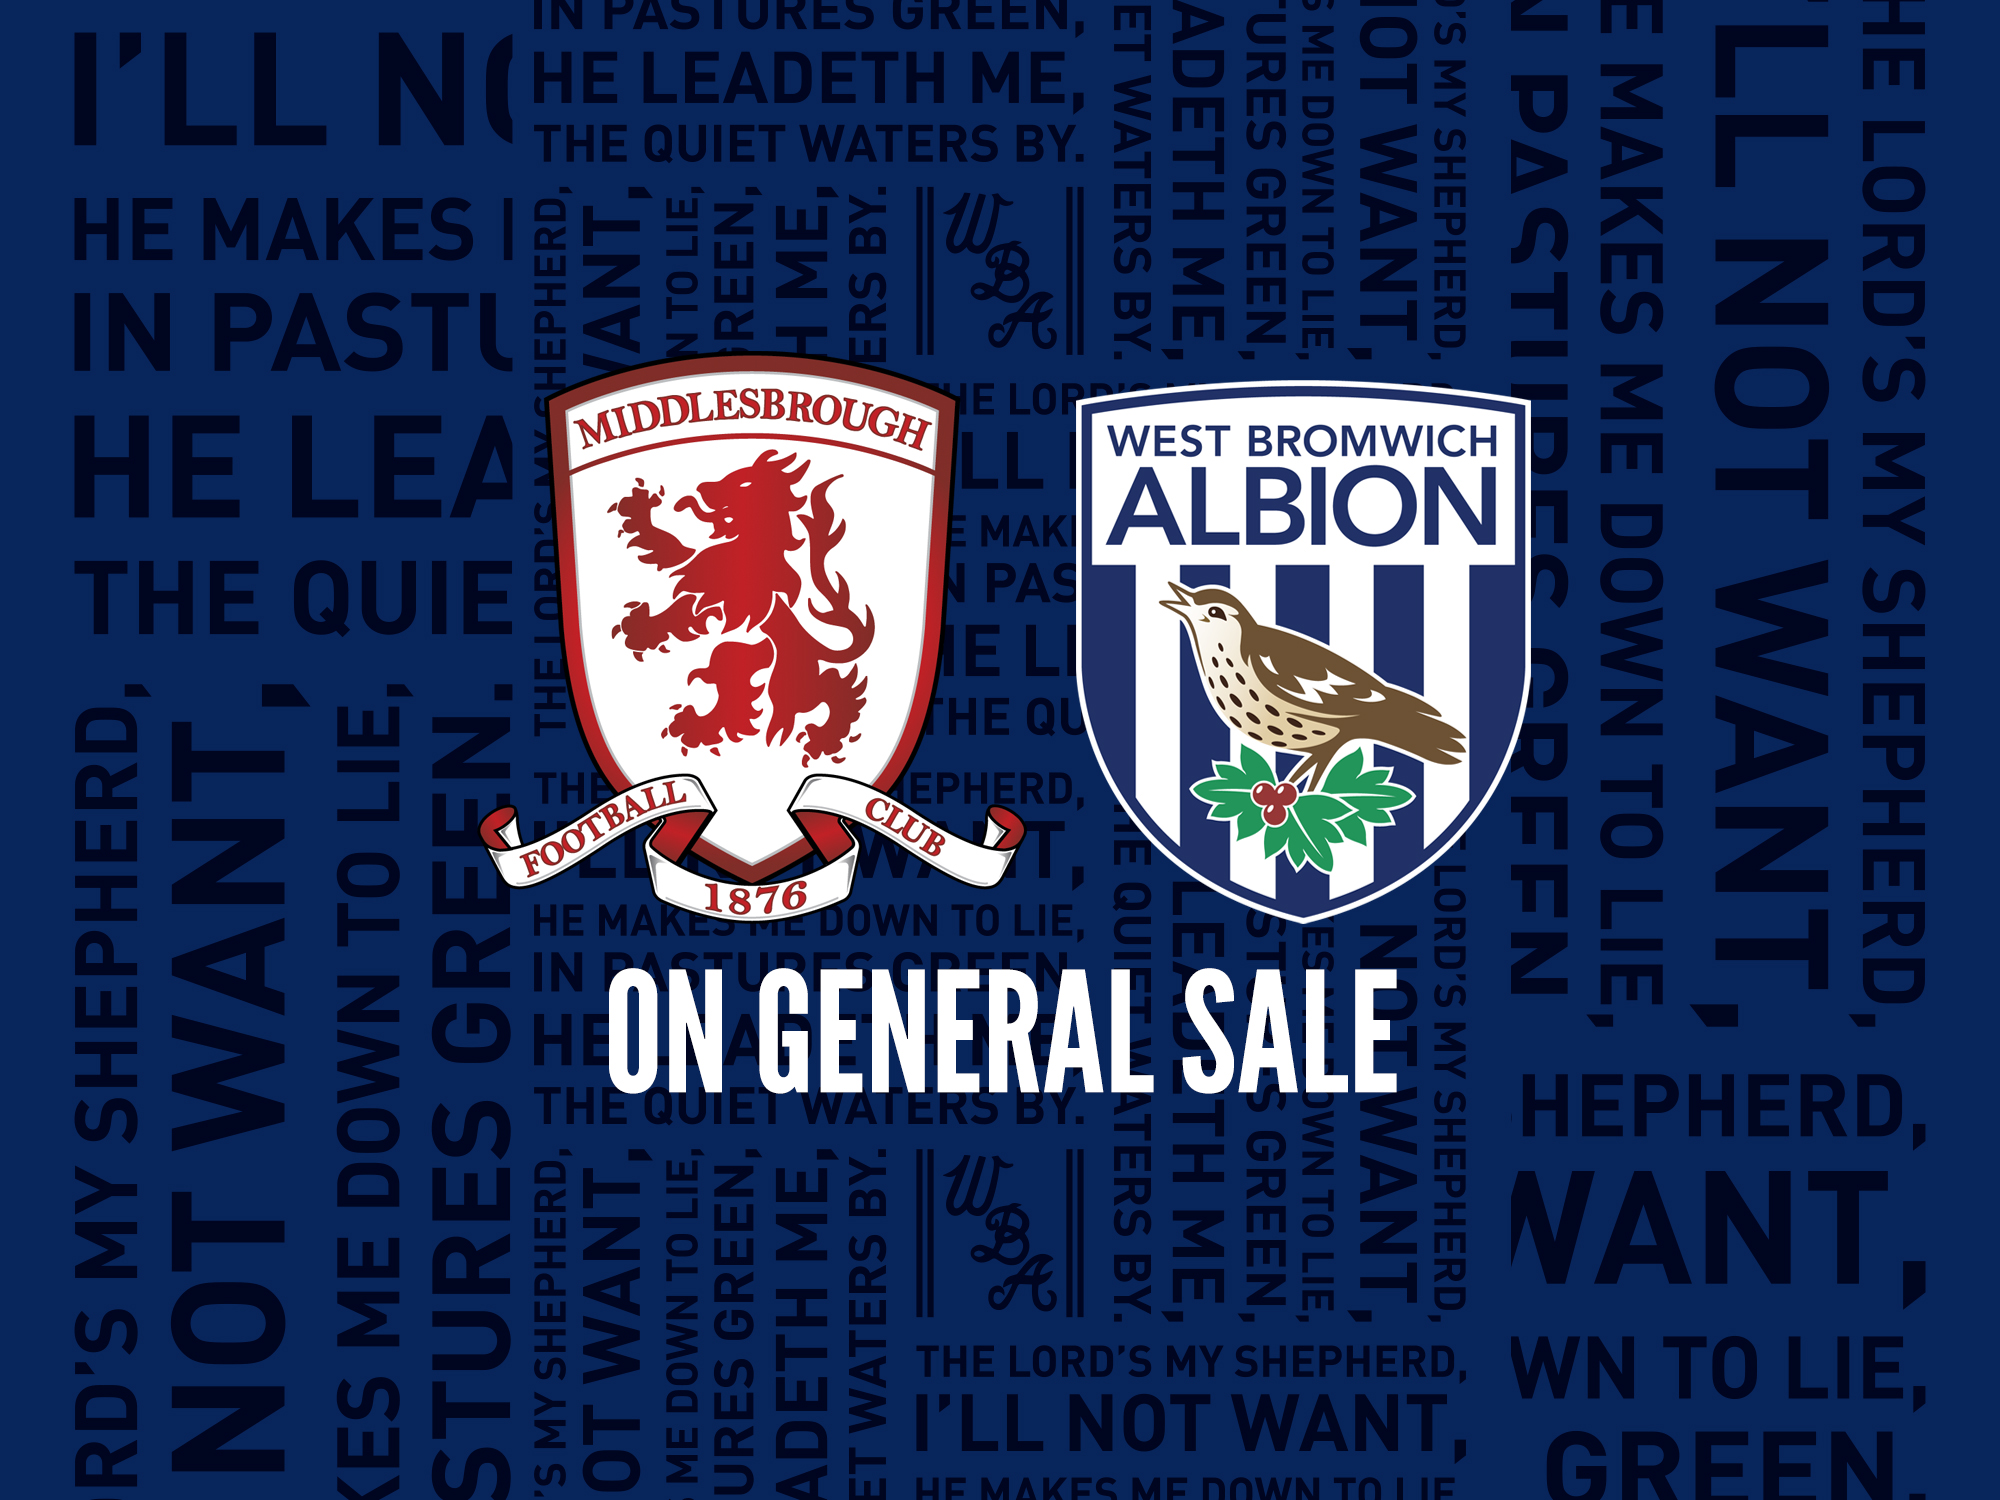 Tickets are now on general sale for Albion's trip to Middlesbrough